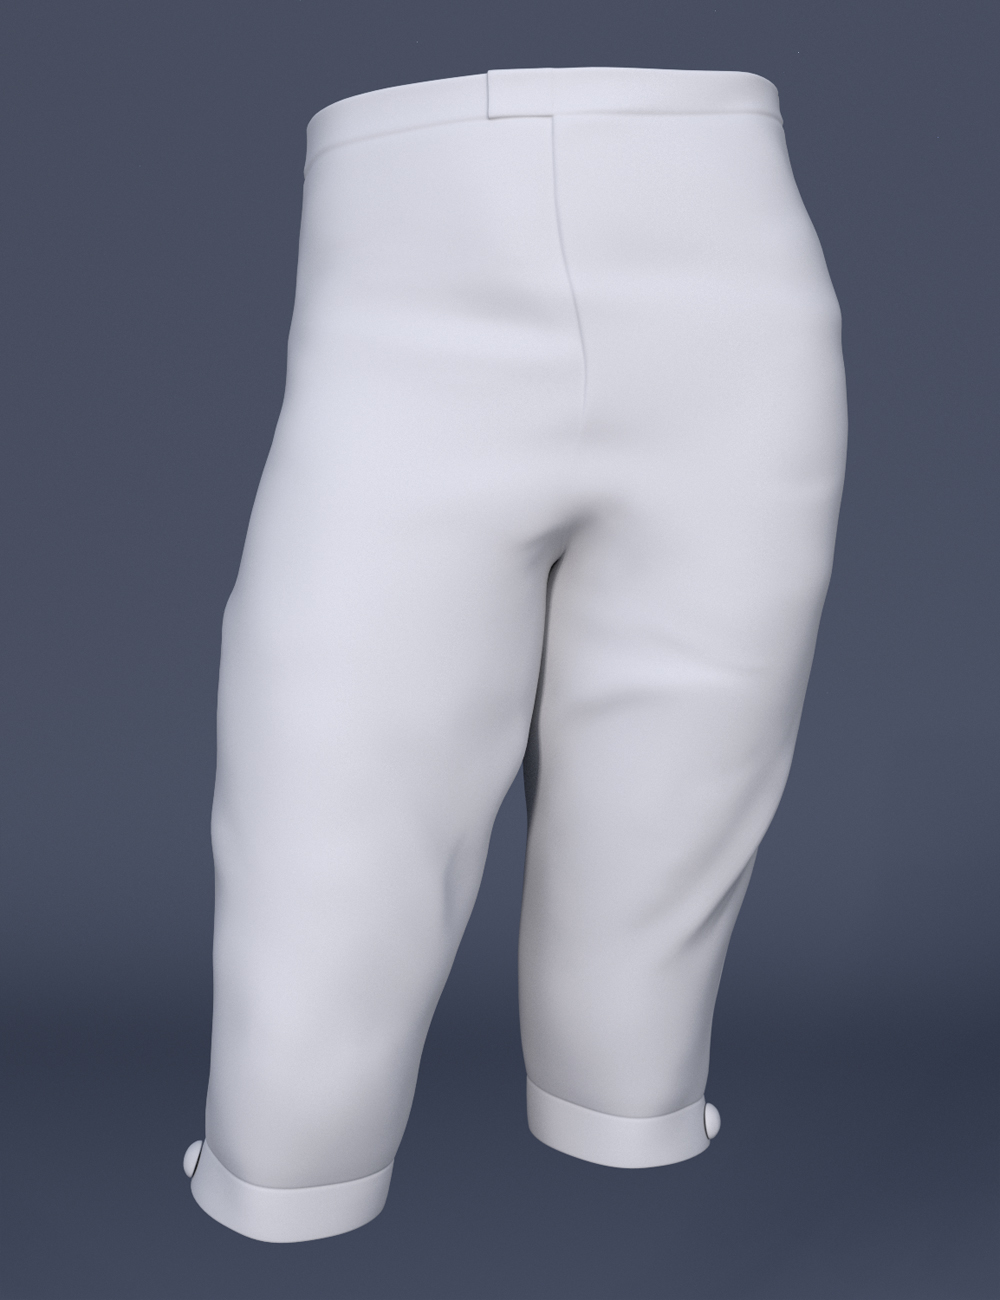 Leprechaun Outfit dForce Pants for Genesis 8 Males by: Mada, 3D Models by Daz 3D